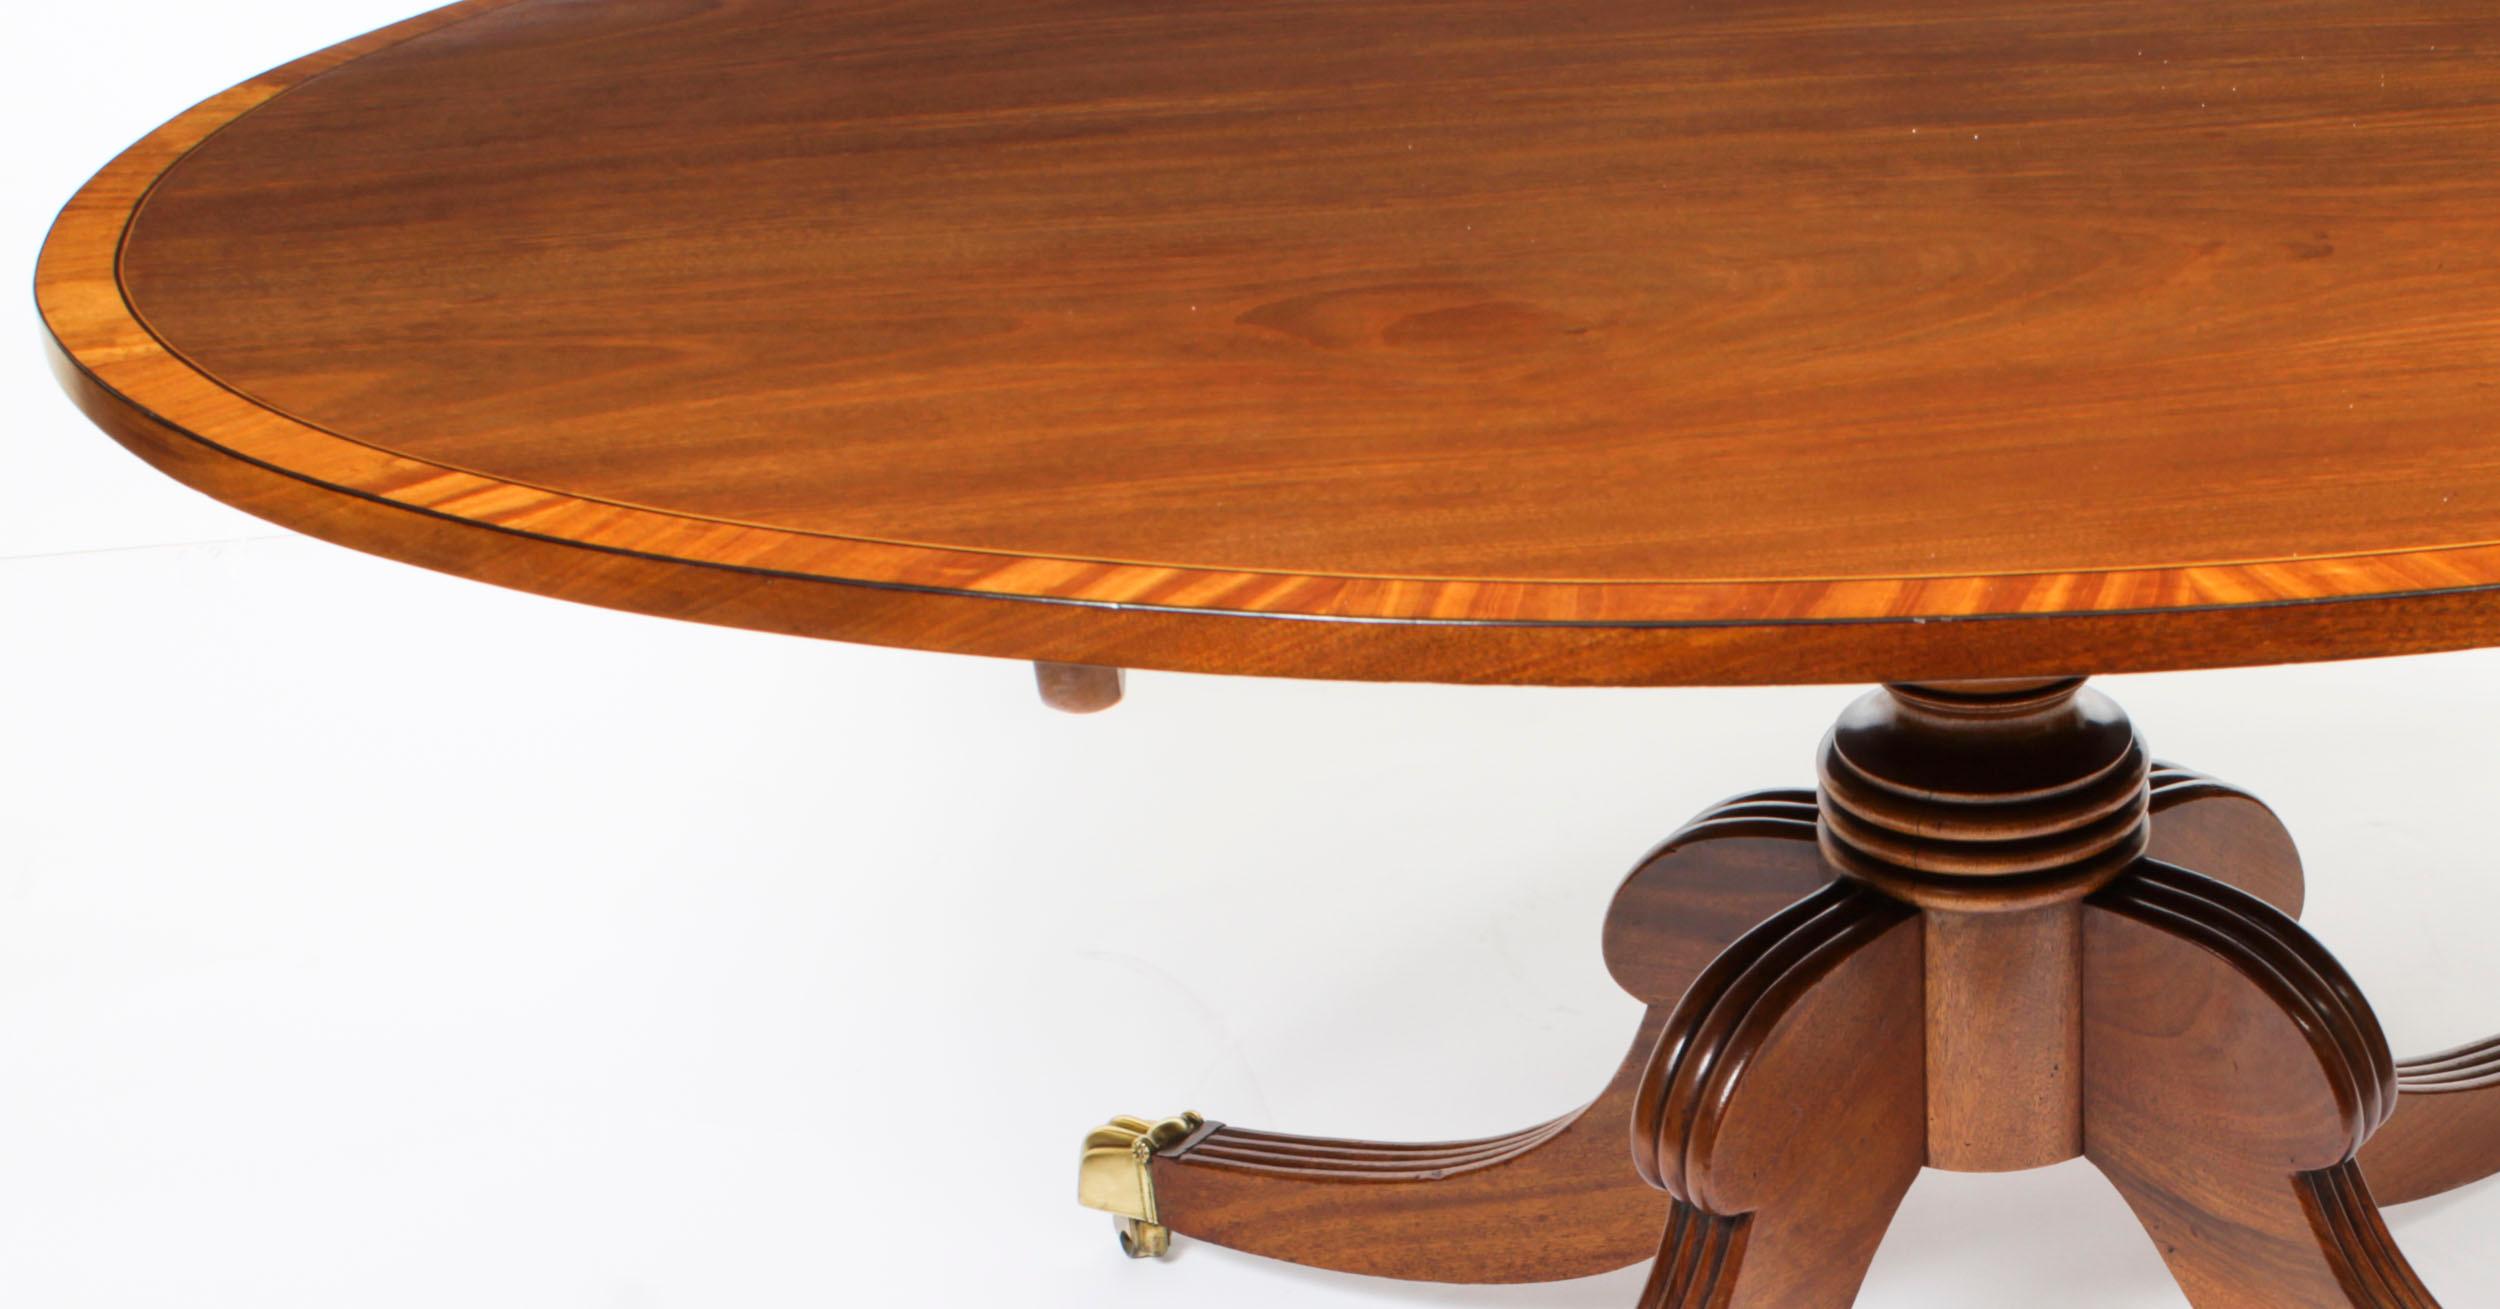 Early 19th Century Antique Oval Regency Flame Mahogany Dining Table 19th C For Sale